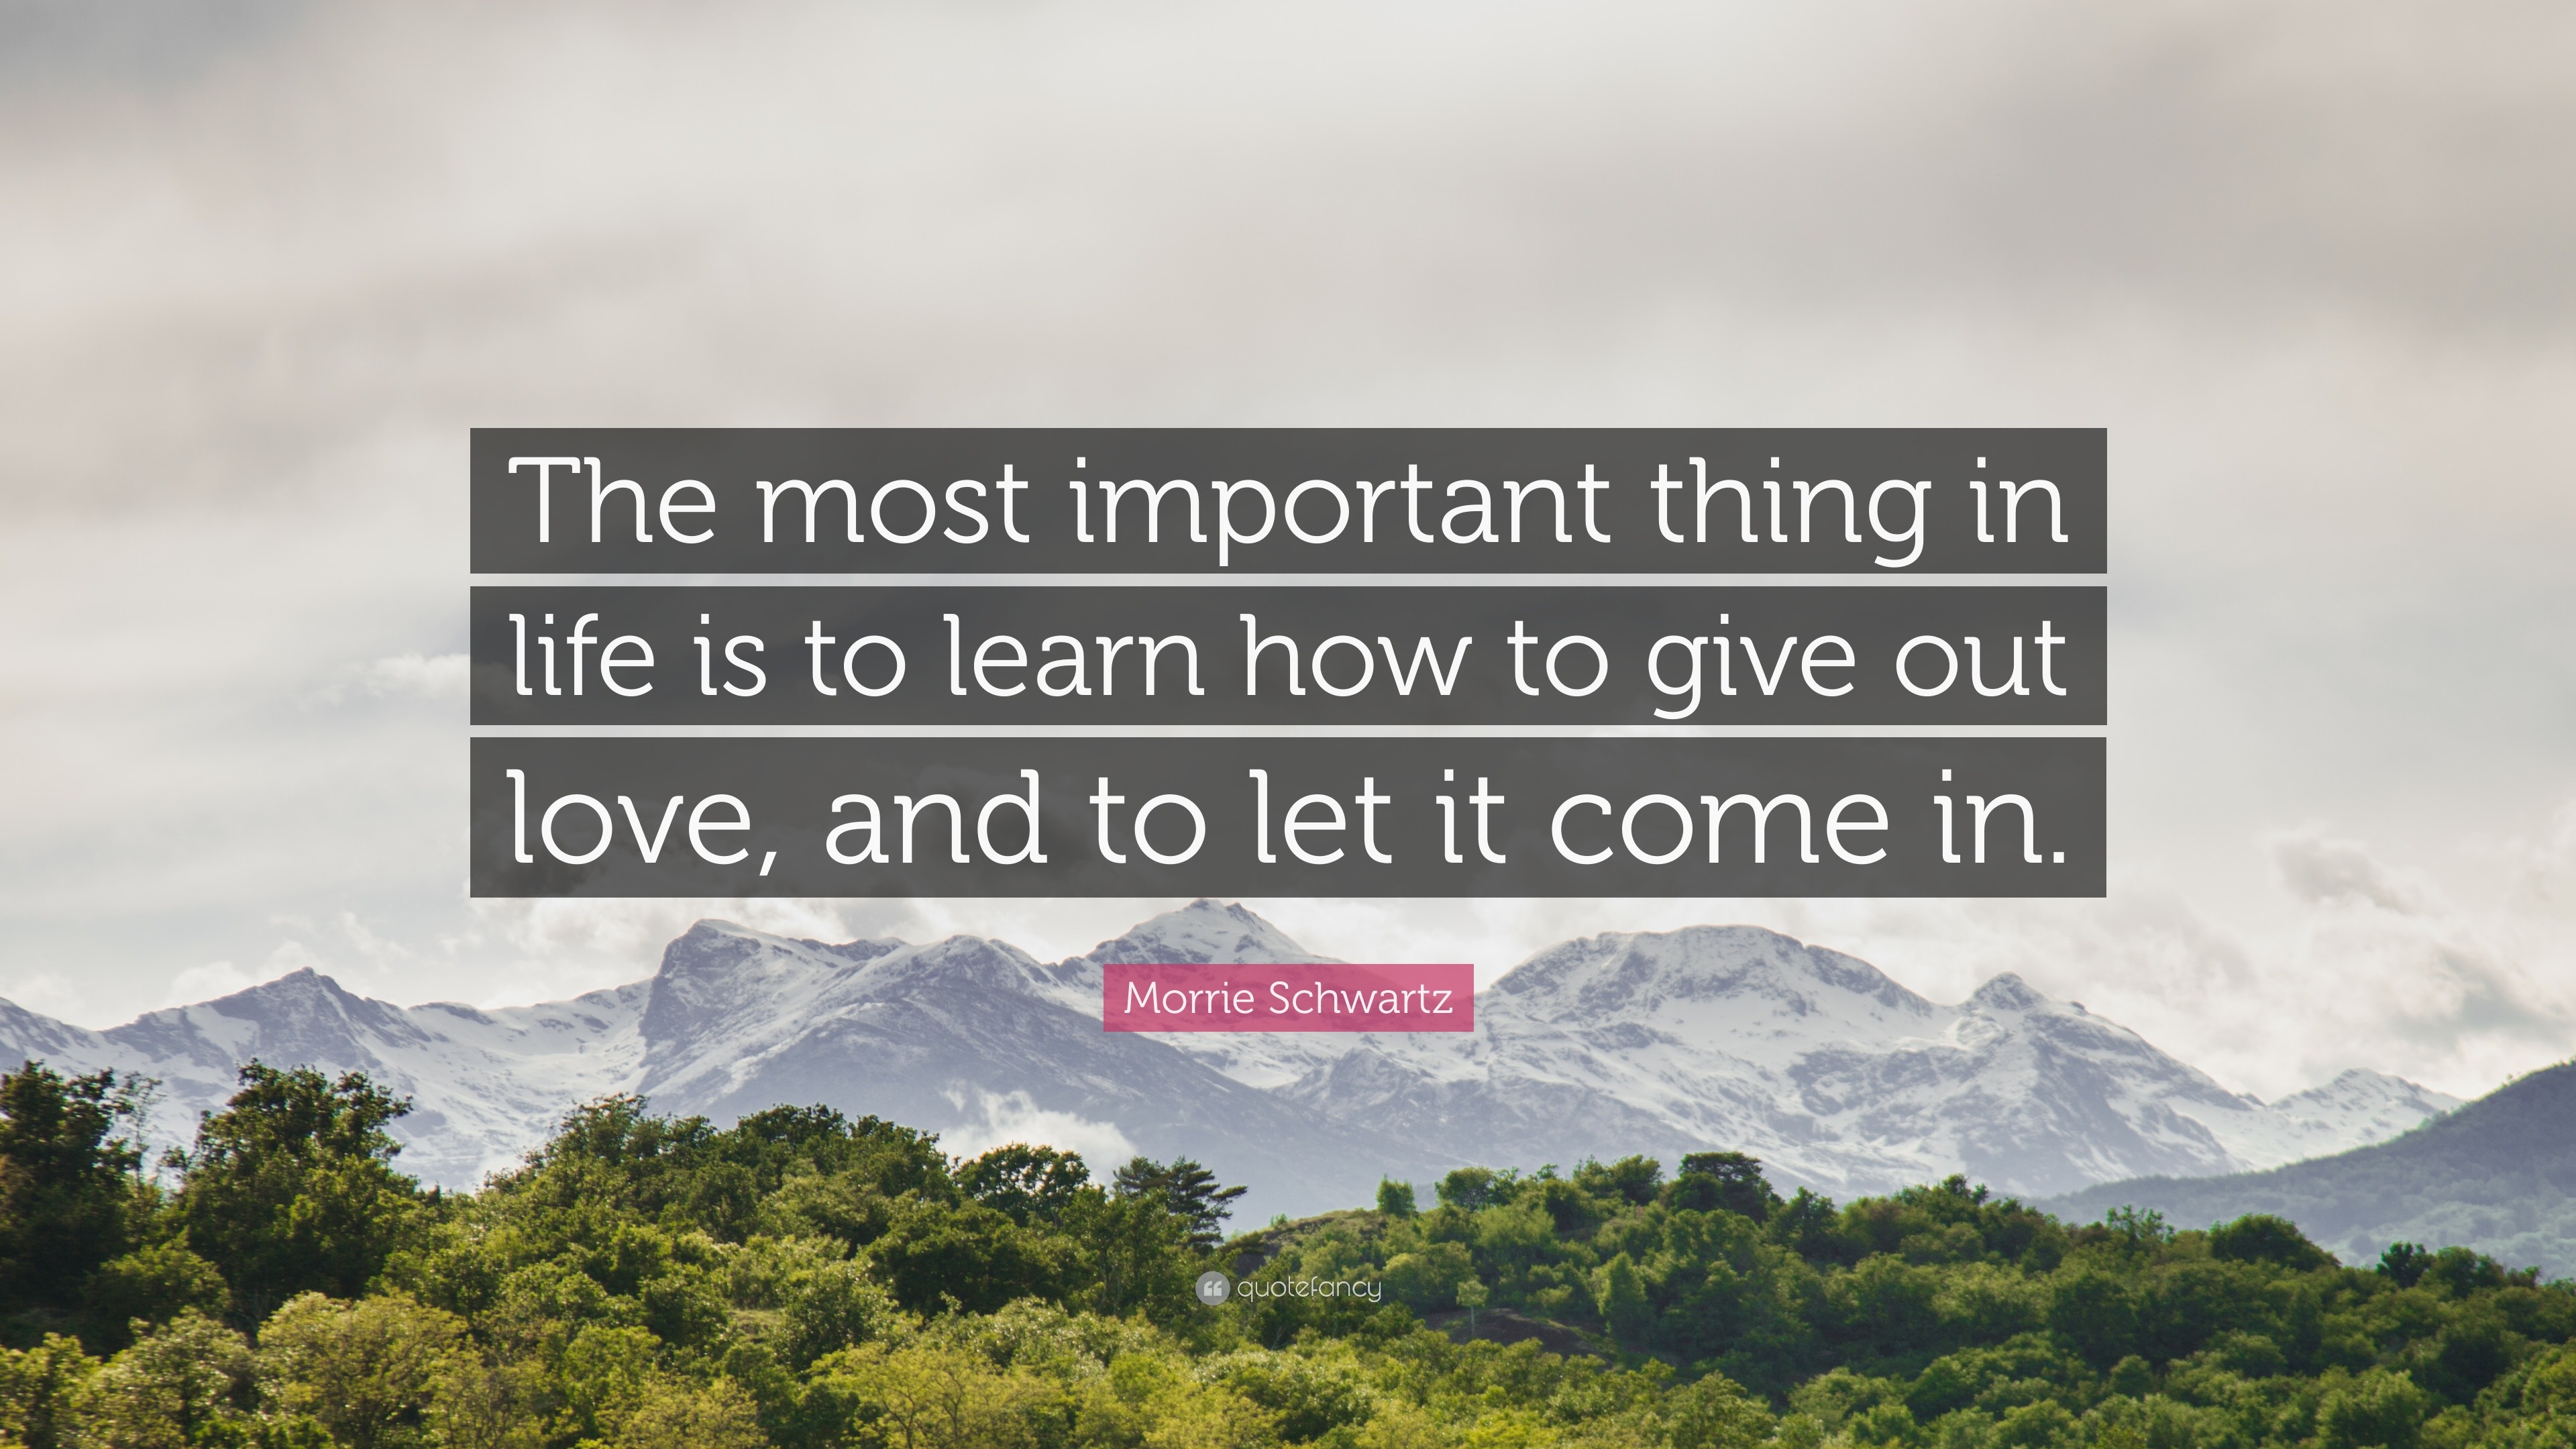 Morrie Schwartz Quote “The most important thing in life is to learn how to